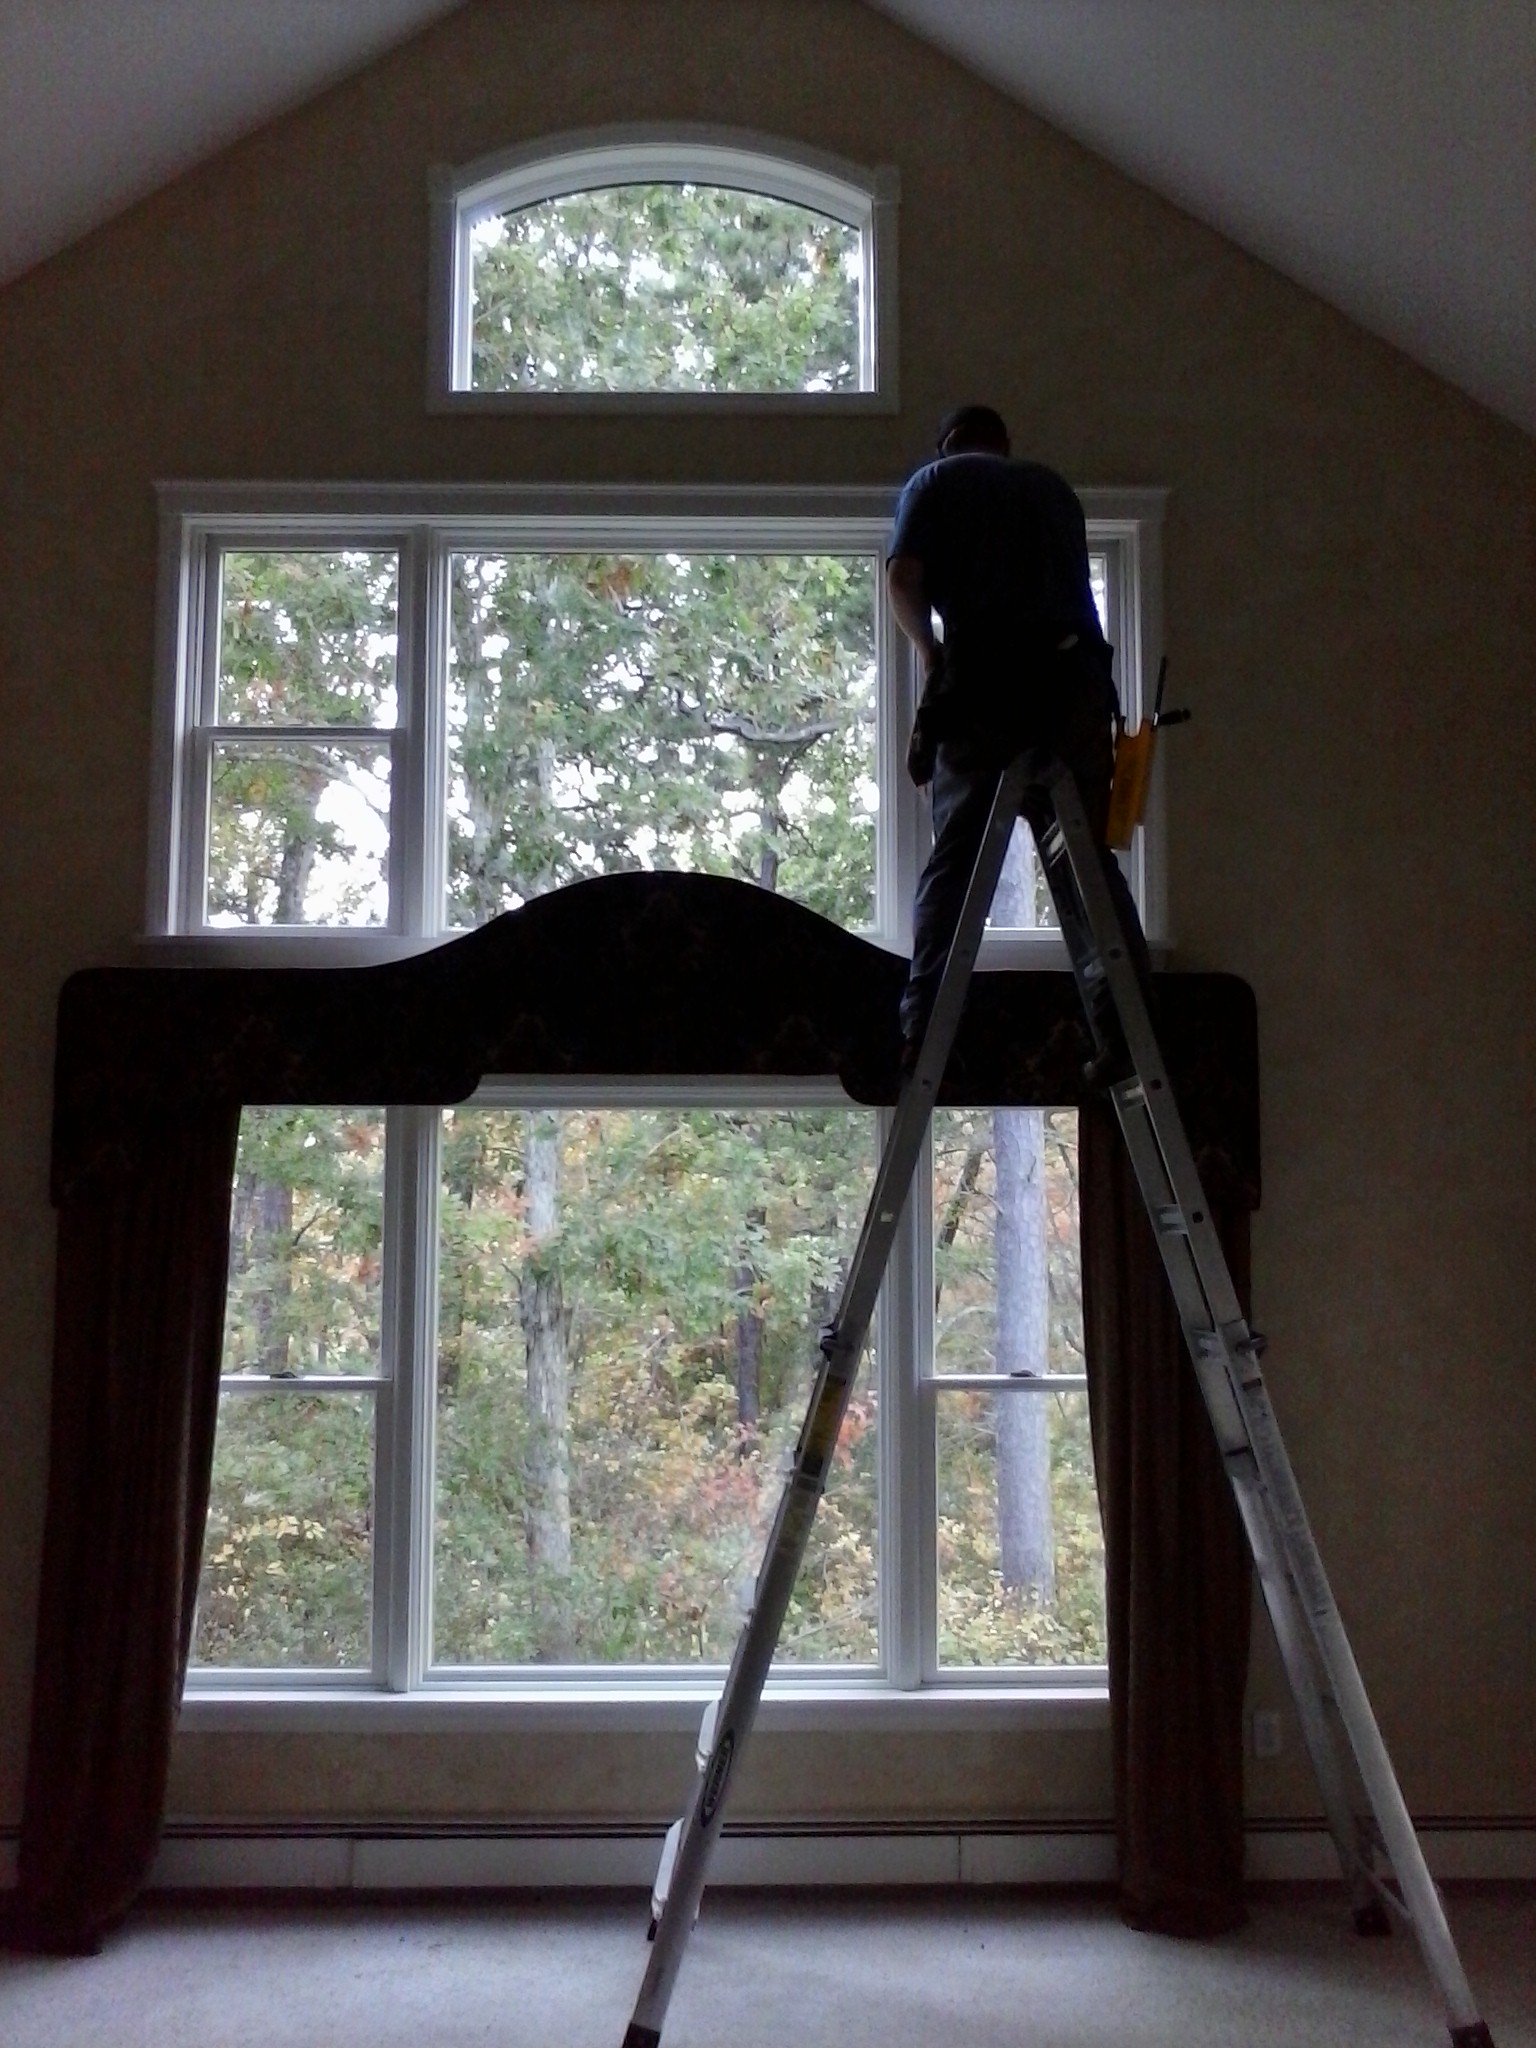 Interior window cleaning